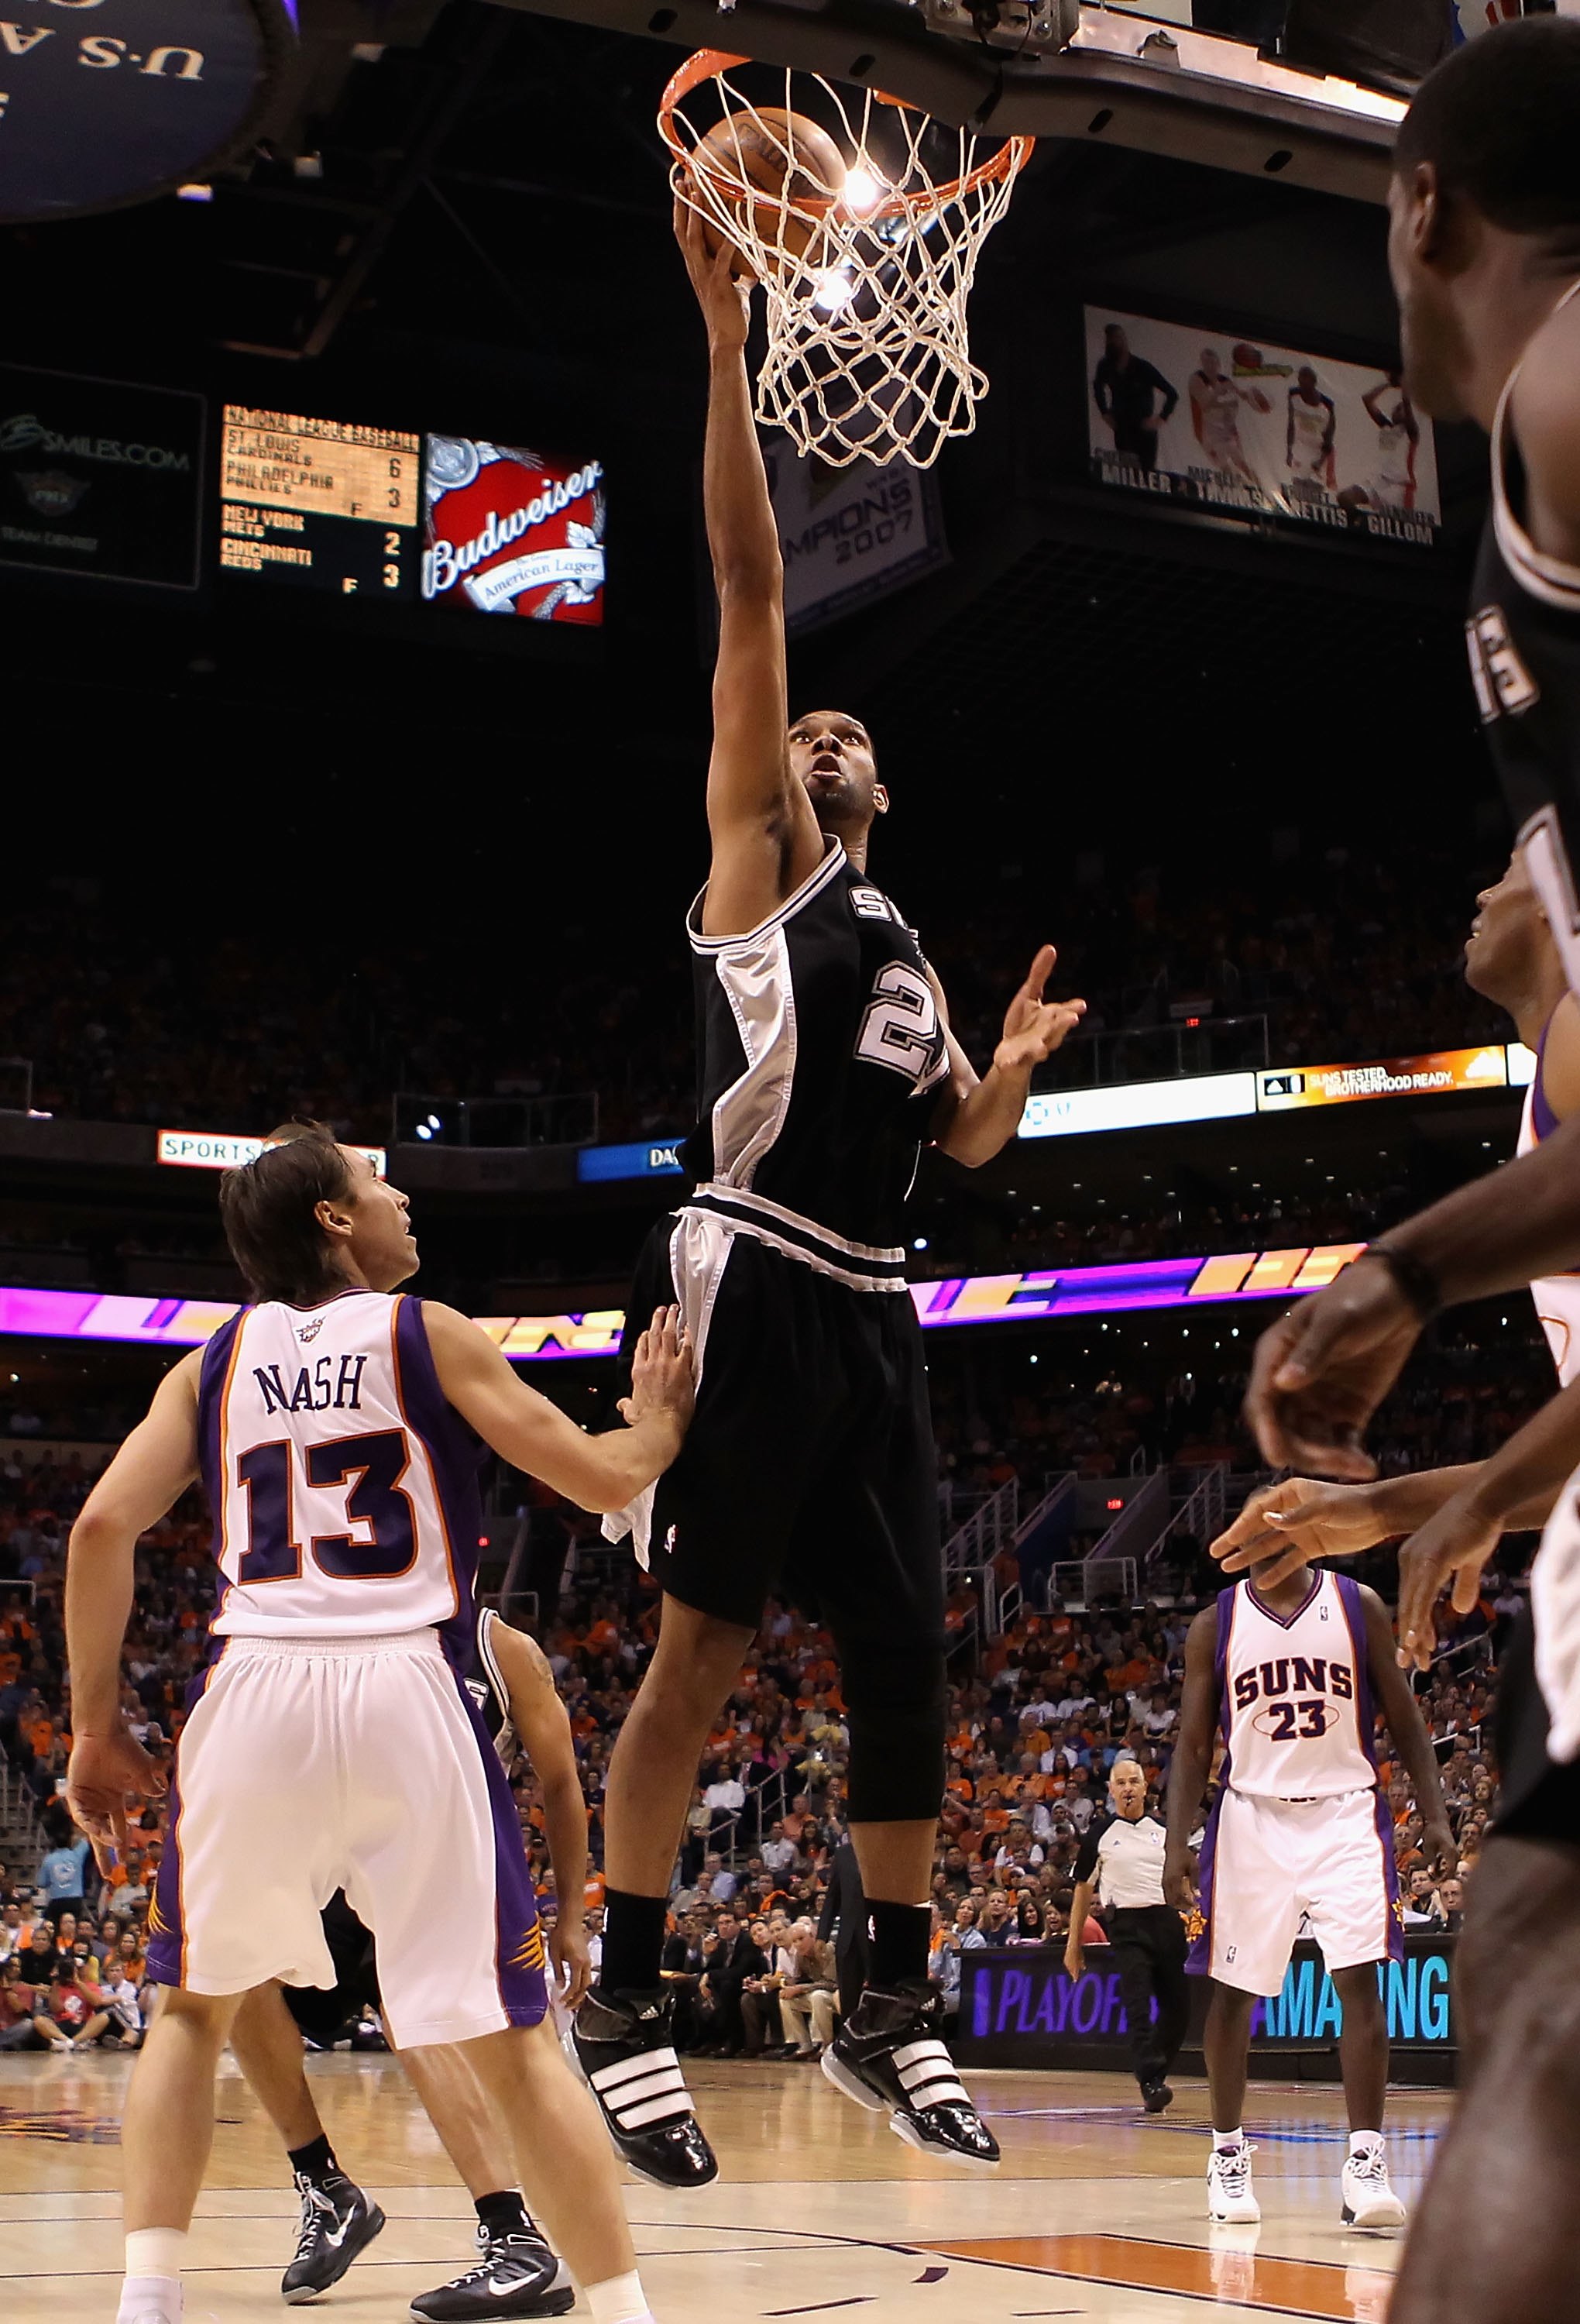 PHOENIX - MAY 03:  Tim Duncan #21 of the San Antonio Spurs puts up a shot against the Phoenix Suns during Game One of the Western Conference Semifinals of the 2010 NBA Playoffs at US Airways Center on May 3, 2010 in Phoenix, Arizona. The Suns defeated the